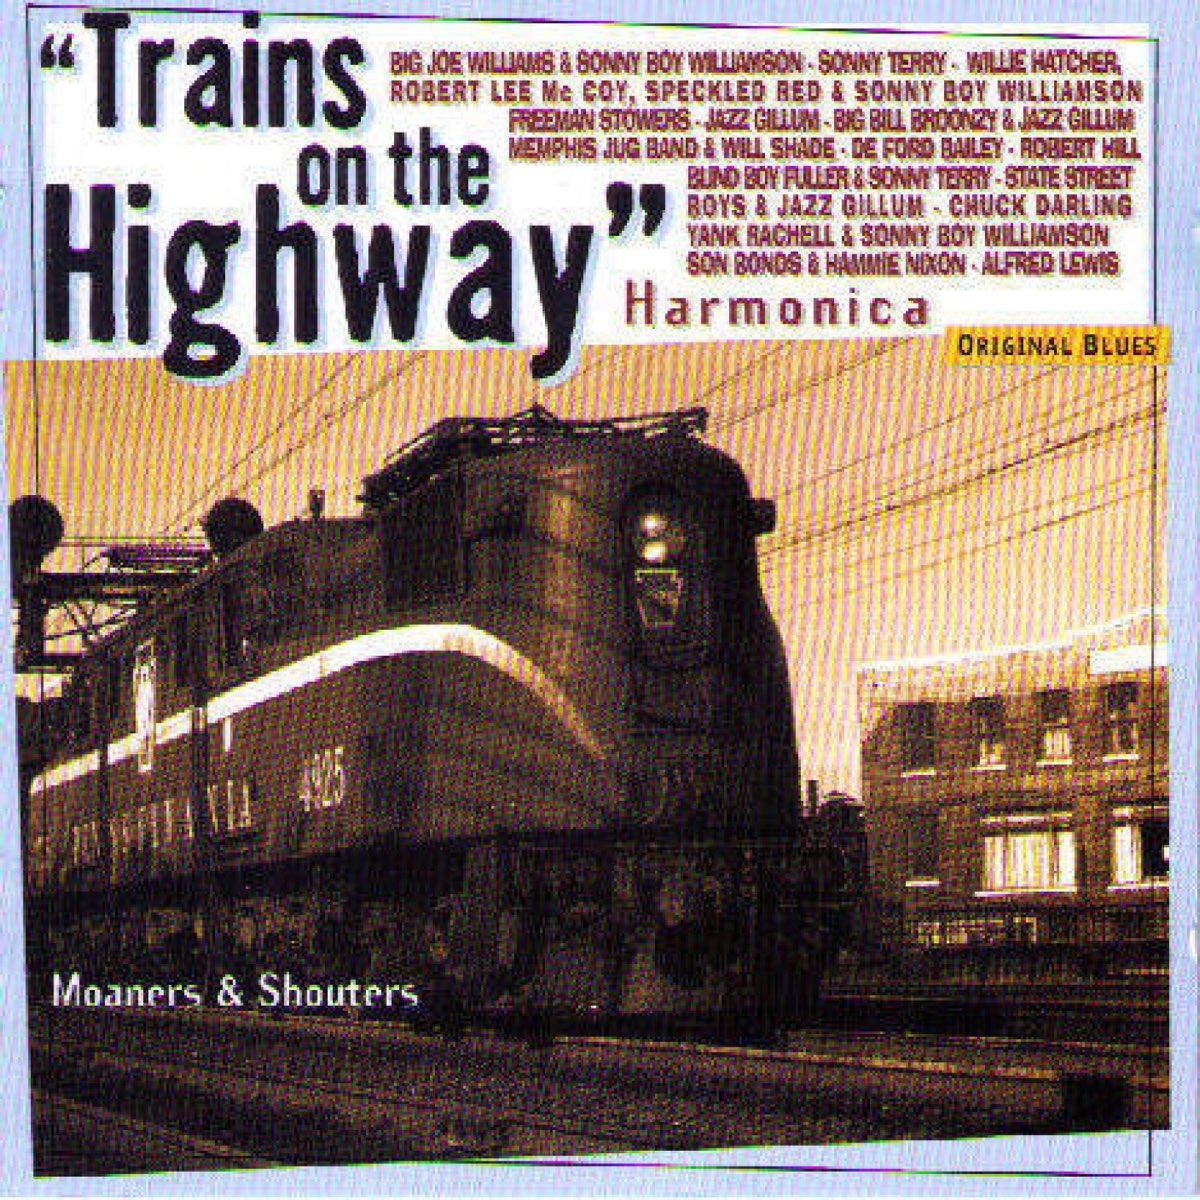 Trains On the Highway (Moaners & Shouters: Harmonica) - Album by Various  Artists - Apple Music